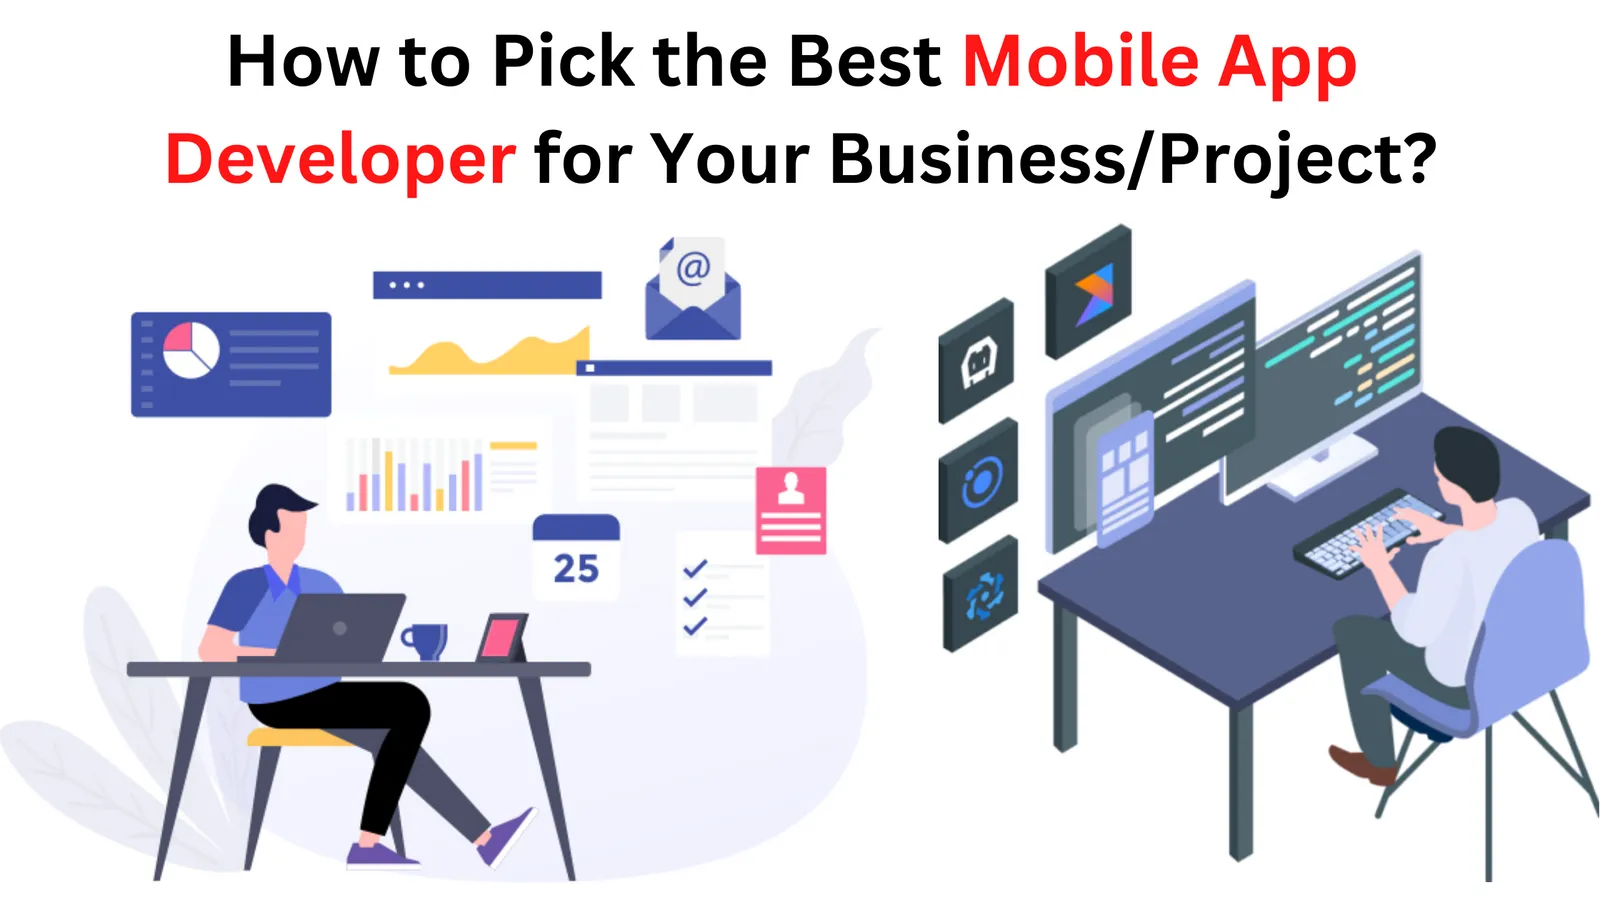 How to Pick the Best Mobile App Developer for Your Business/Project?